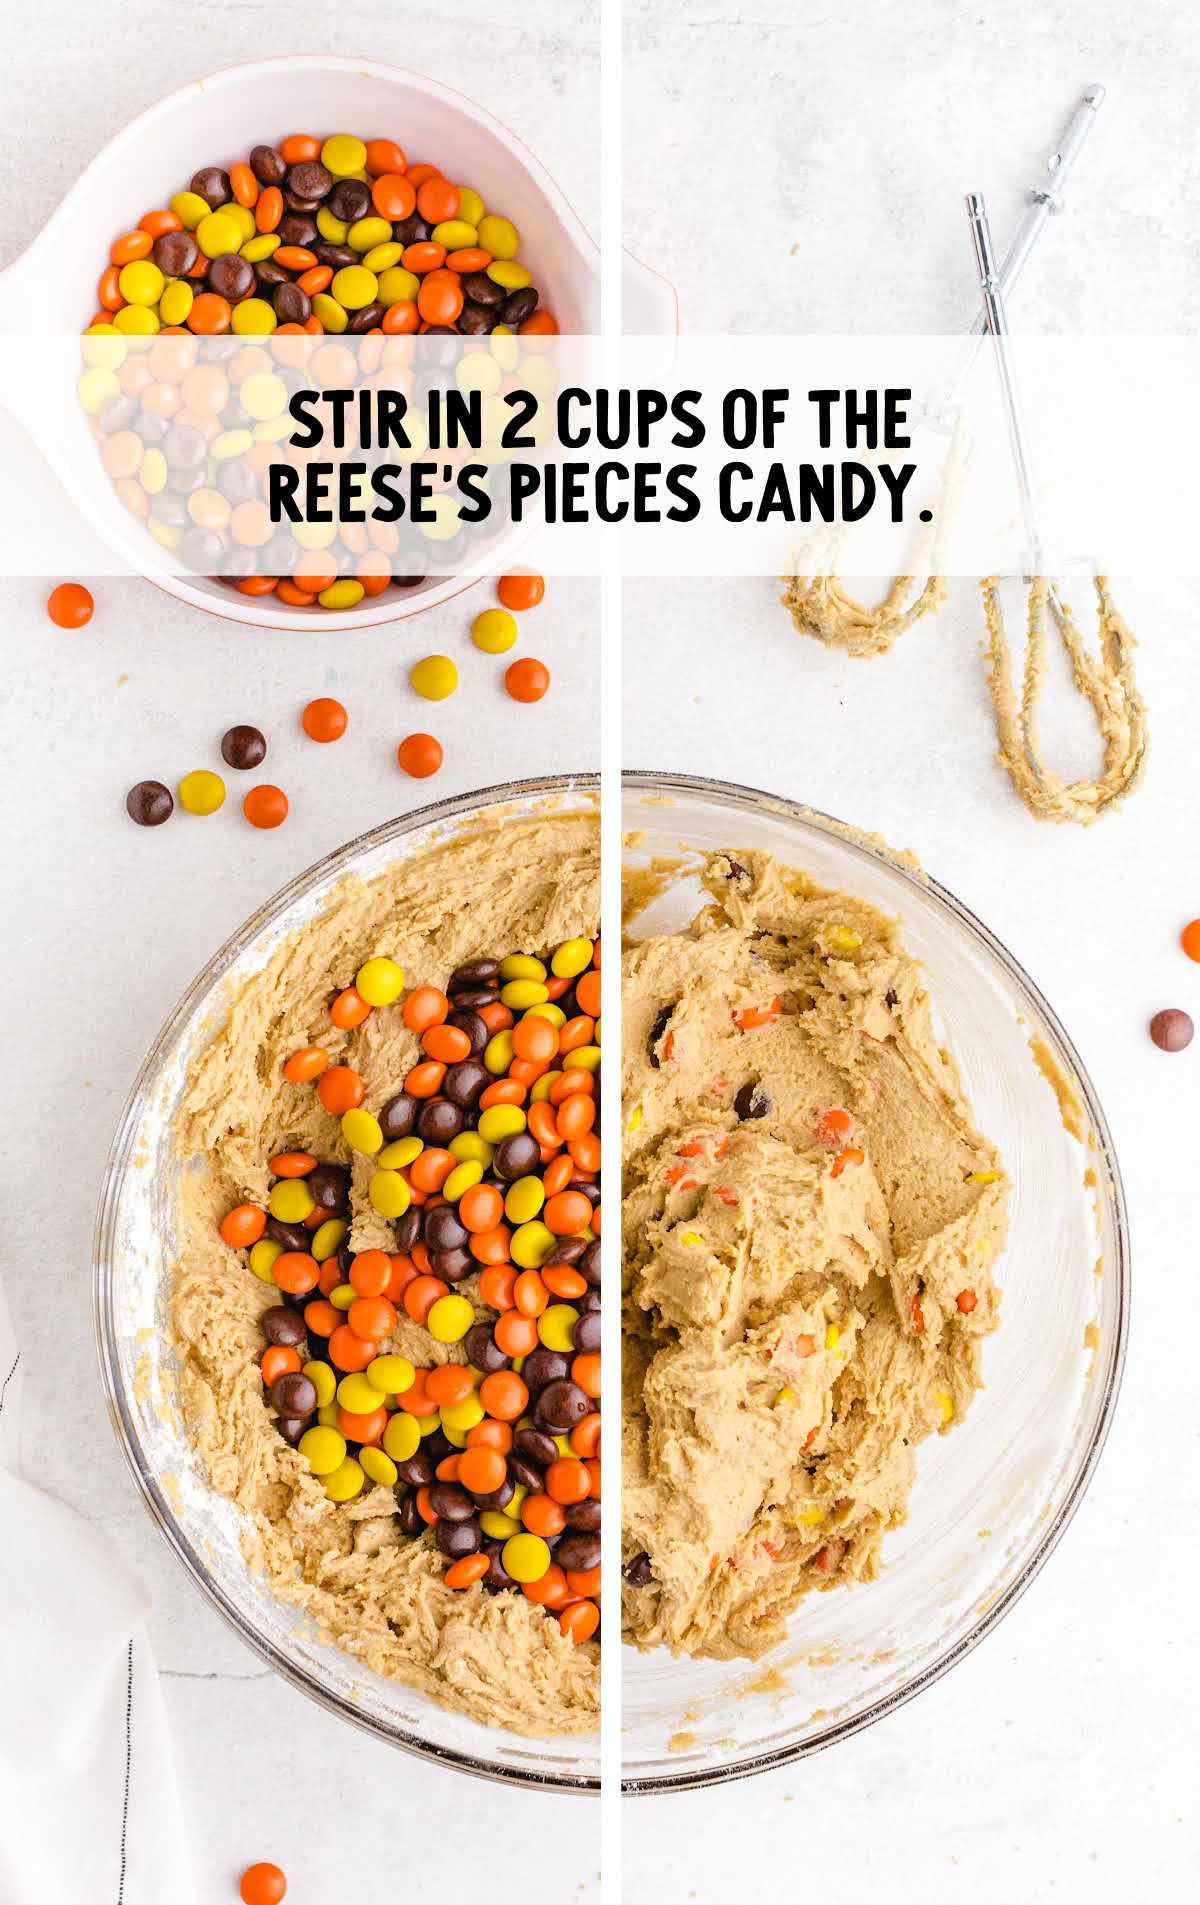 Reese's pieces candy being added to cookie dough